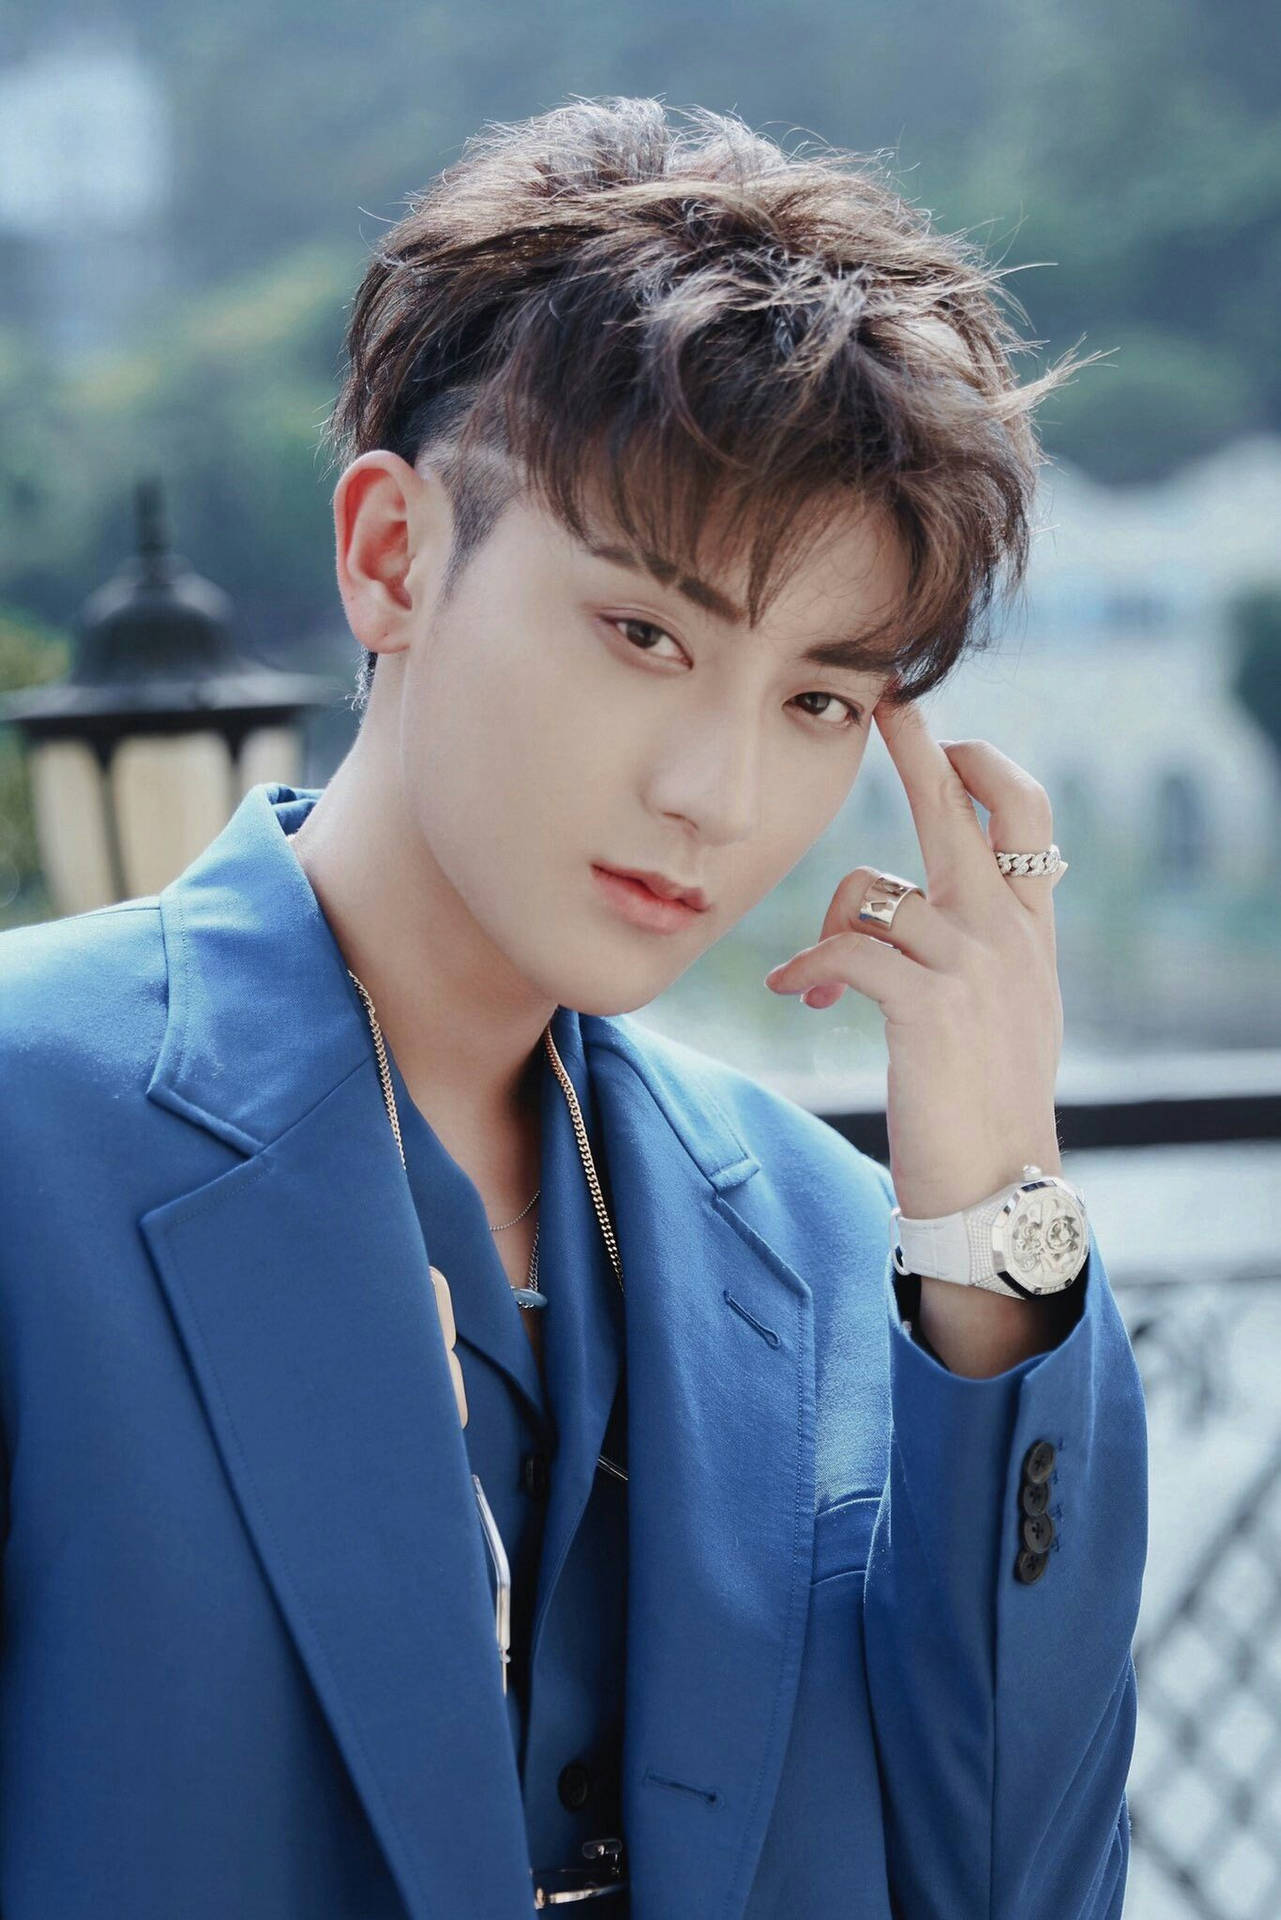 Chinese Actor Huang Zi Tao Background